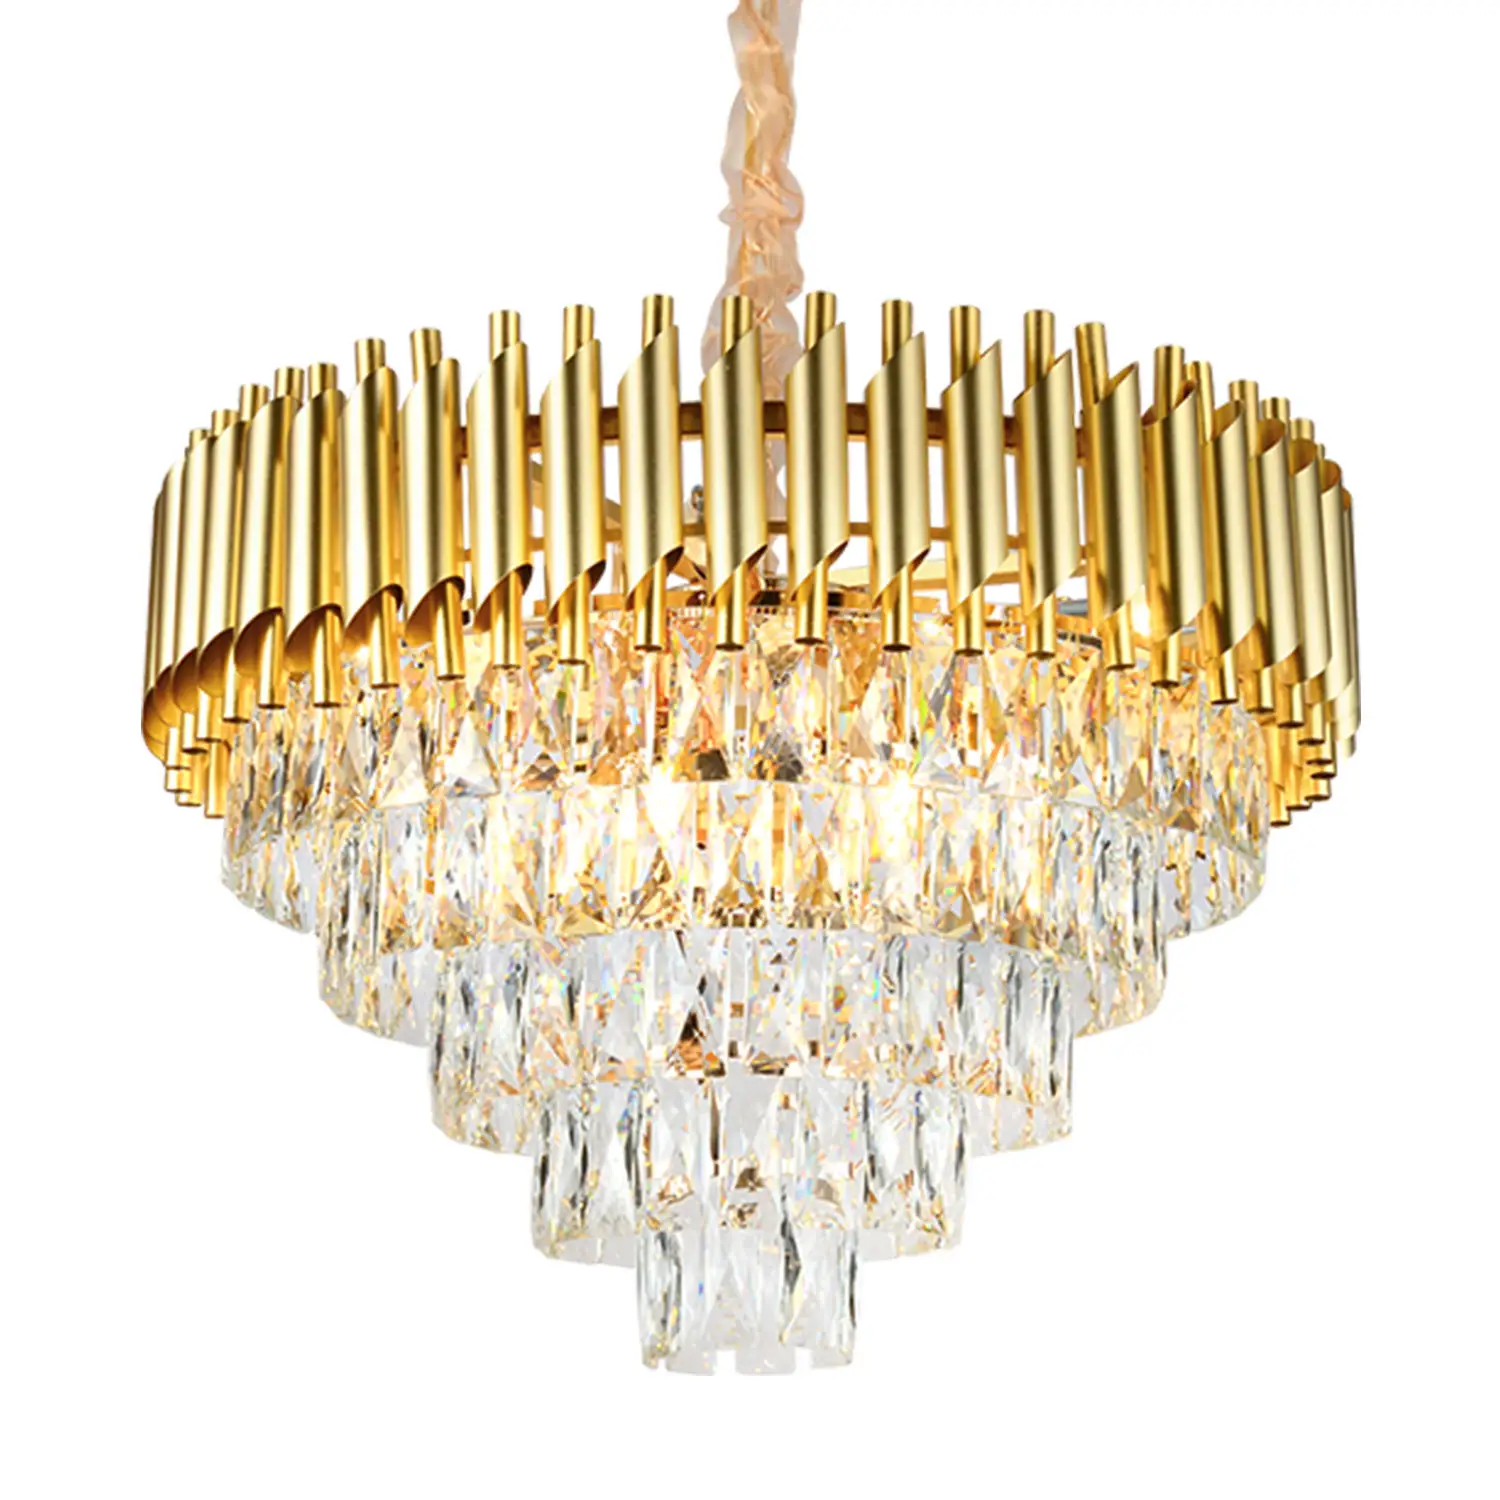 Home Chandelier China Trade,Buy China Direct From Home Chandelier 